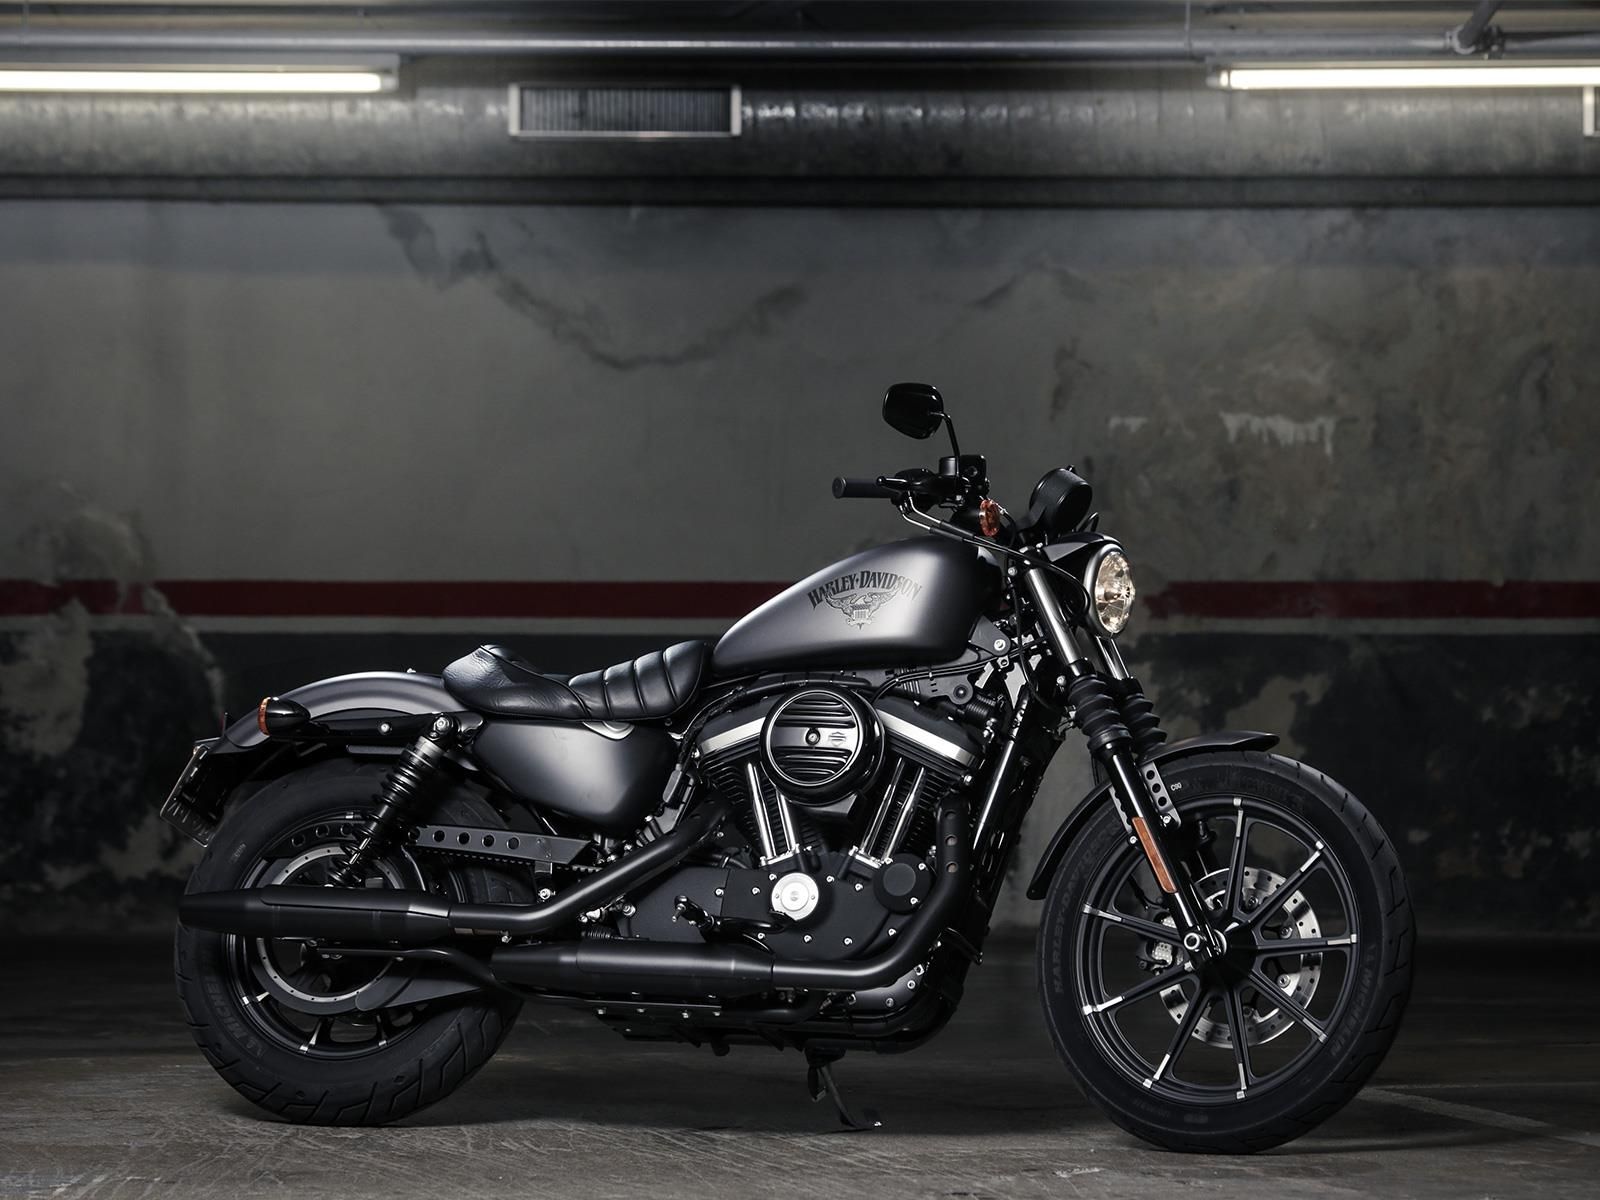 Harley-Davidson Iron 883: Classic Styling in the Heart of Jerusalem